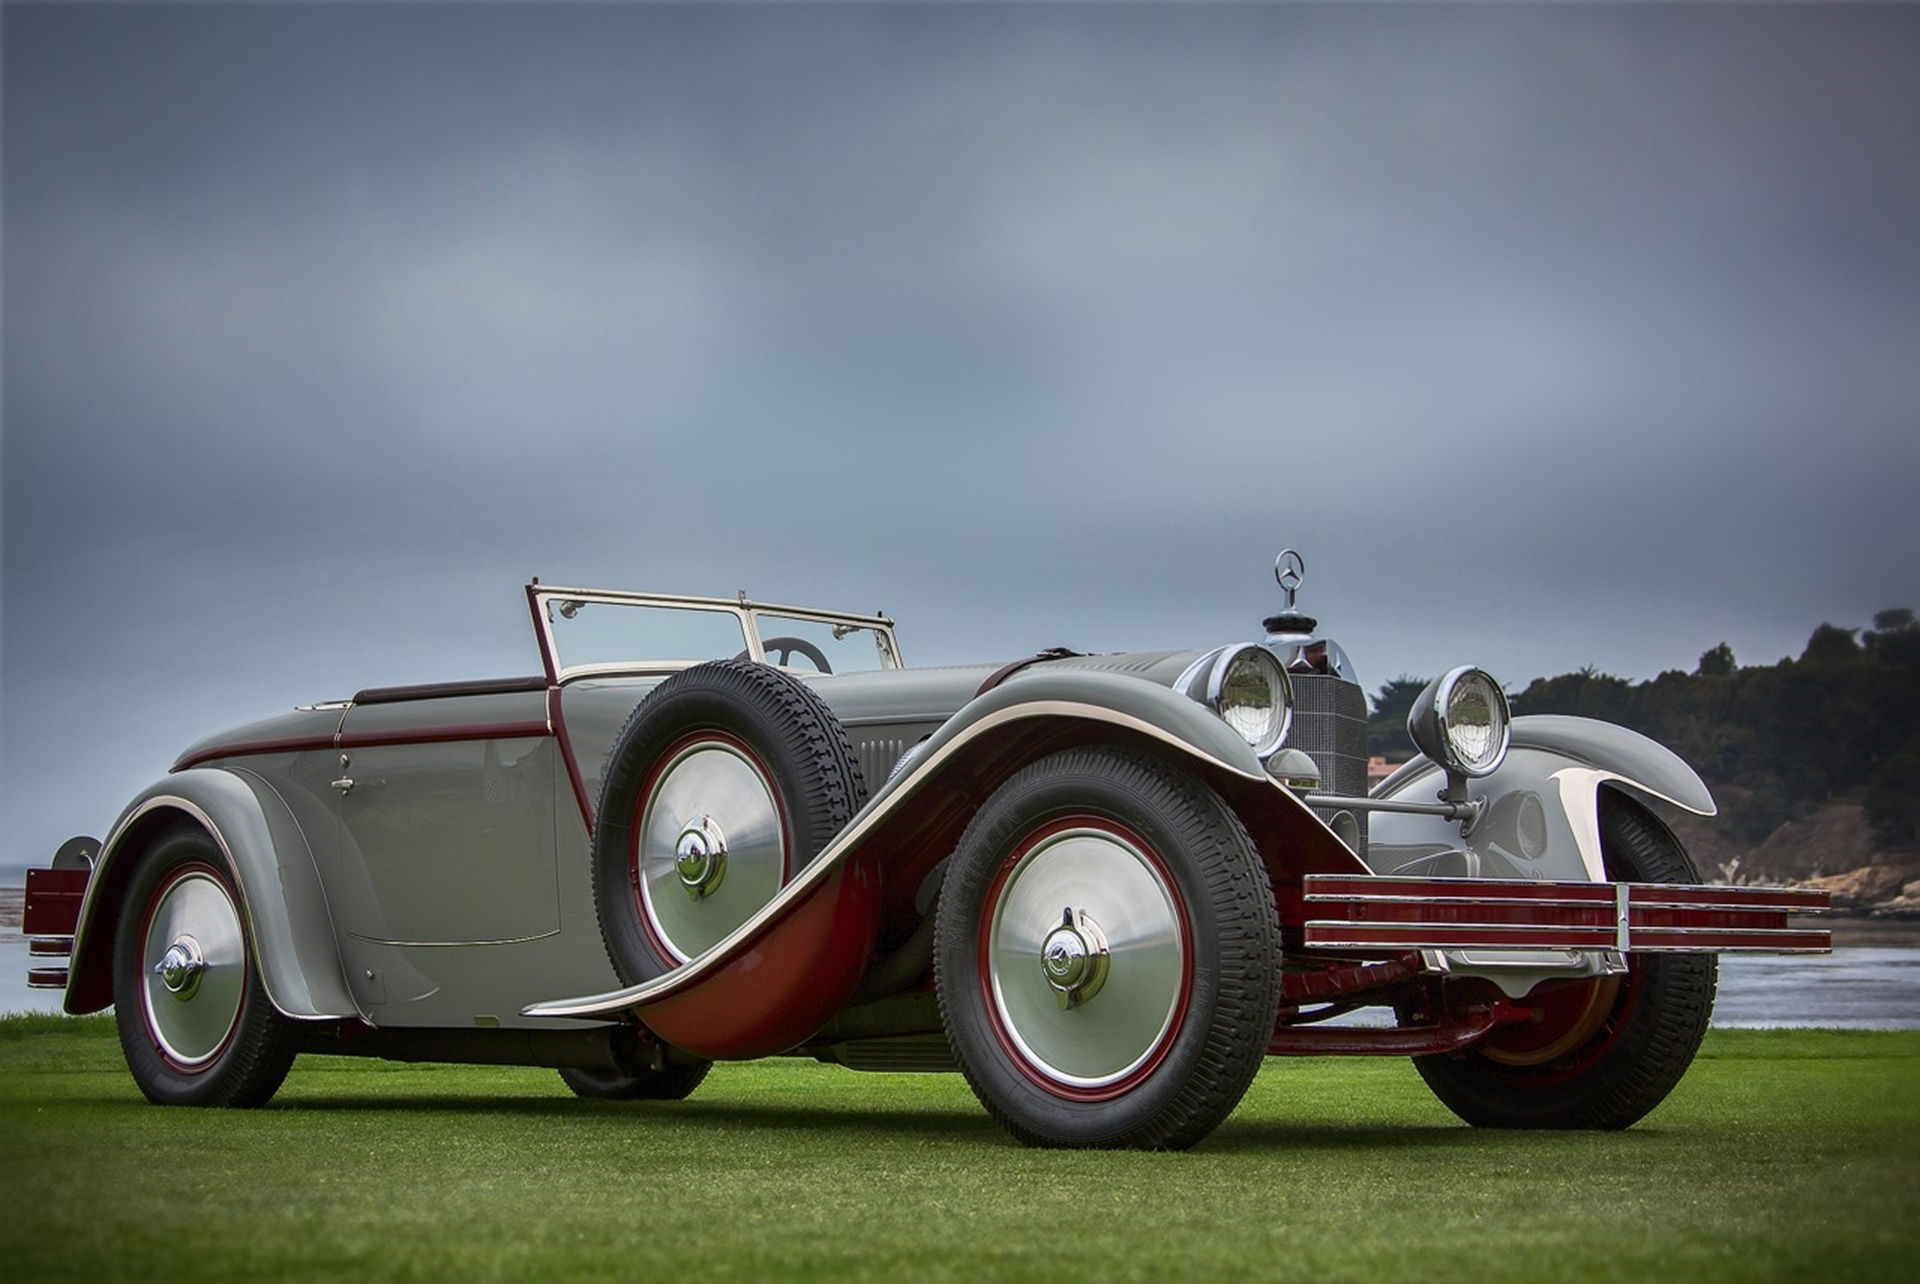 Mercedes-Benz wins Best of Show title at the 2012 Pebble Beach Concours d’Elegance